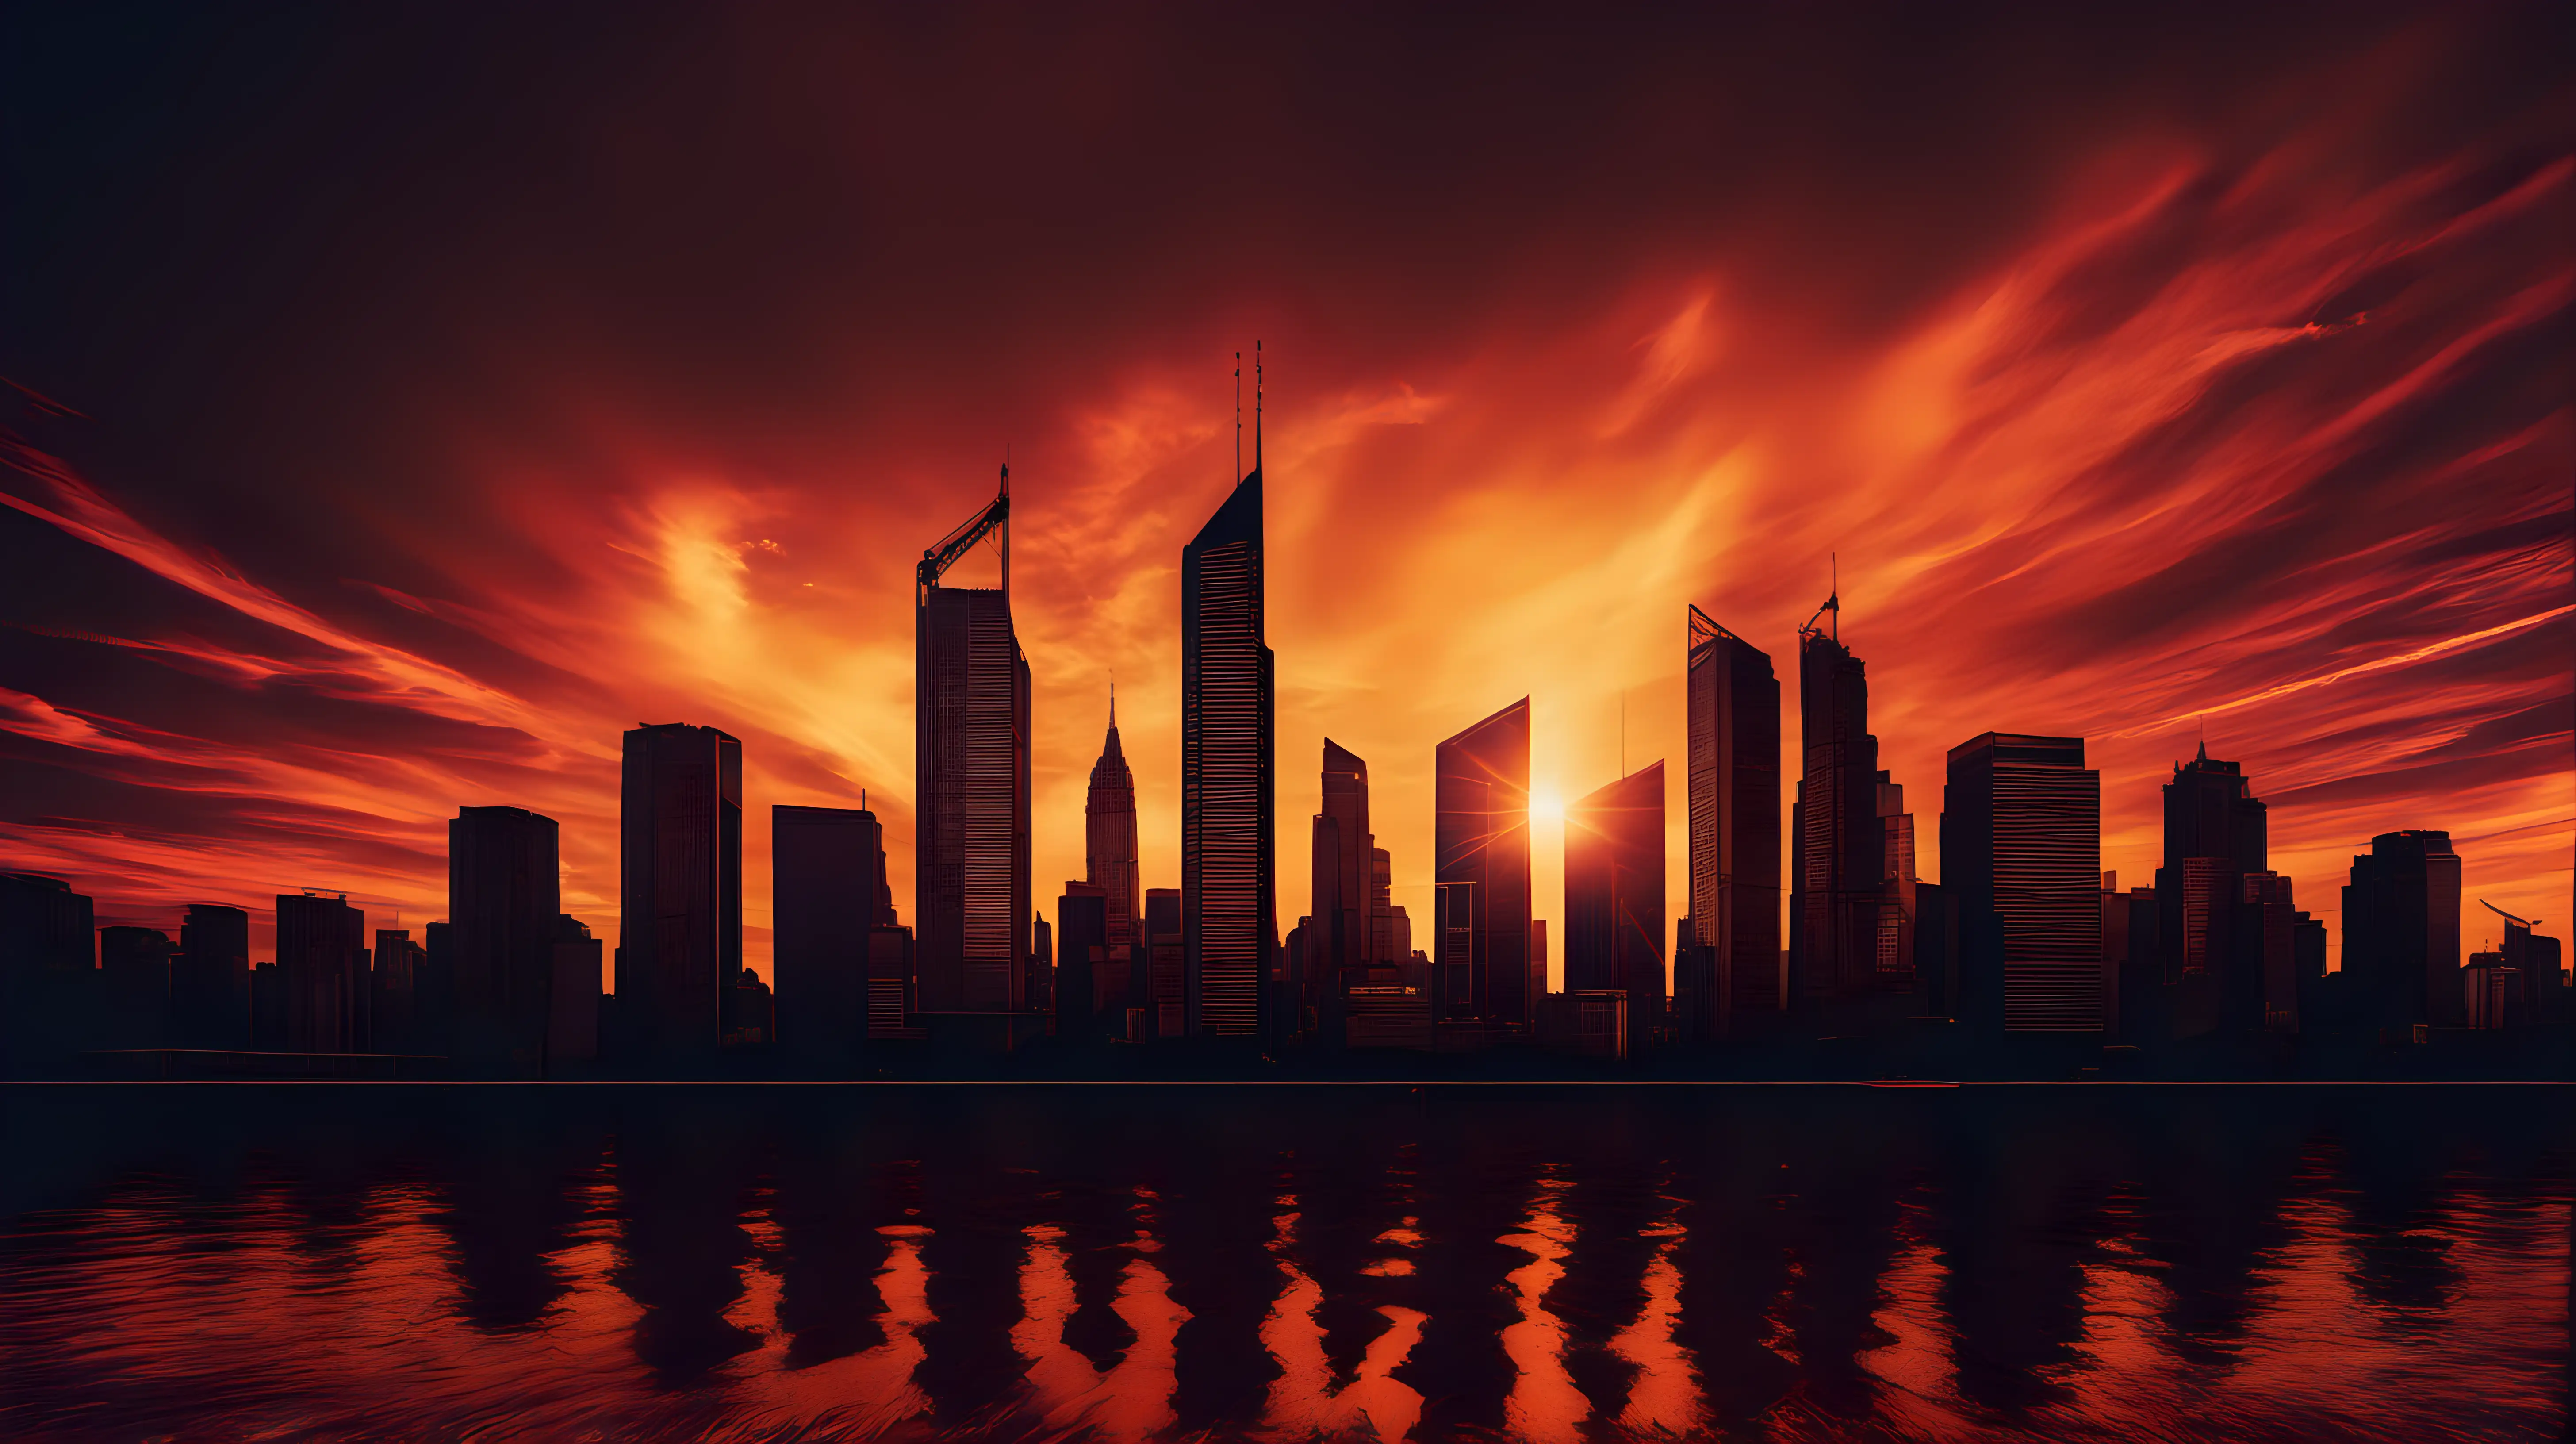 A dramatic skyline with skyscrapers outlined against a blazing sunset in the city.